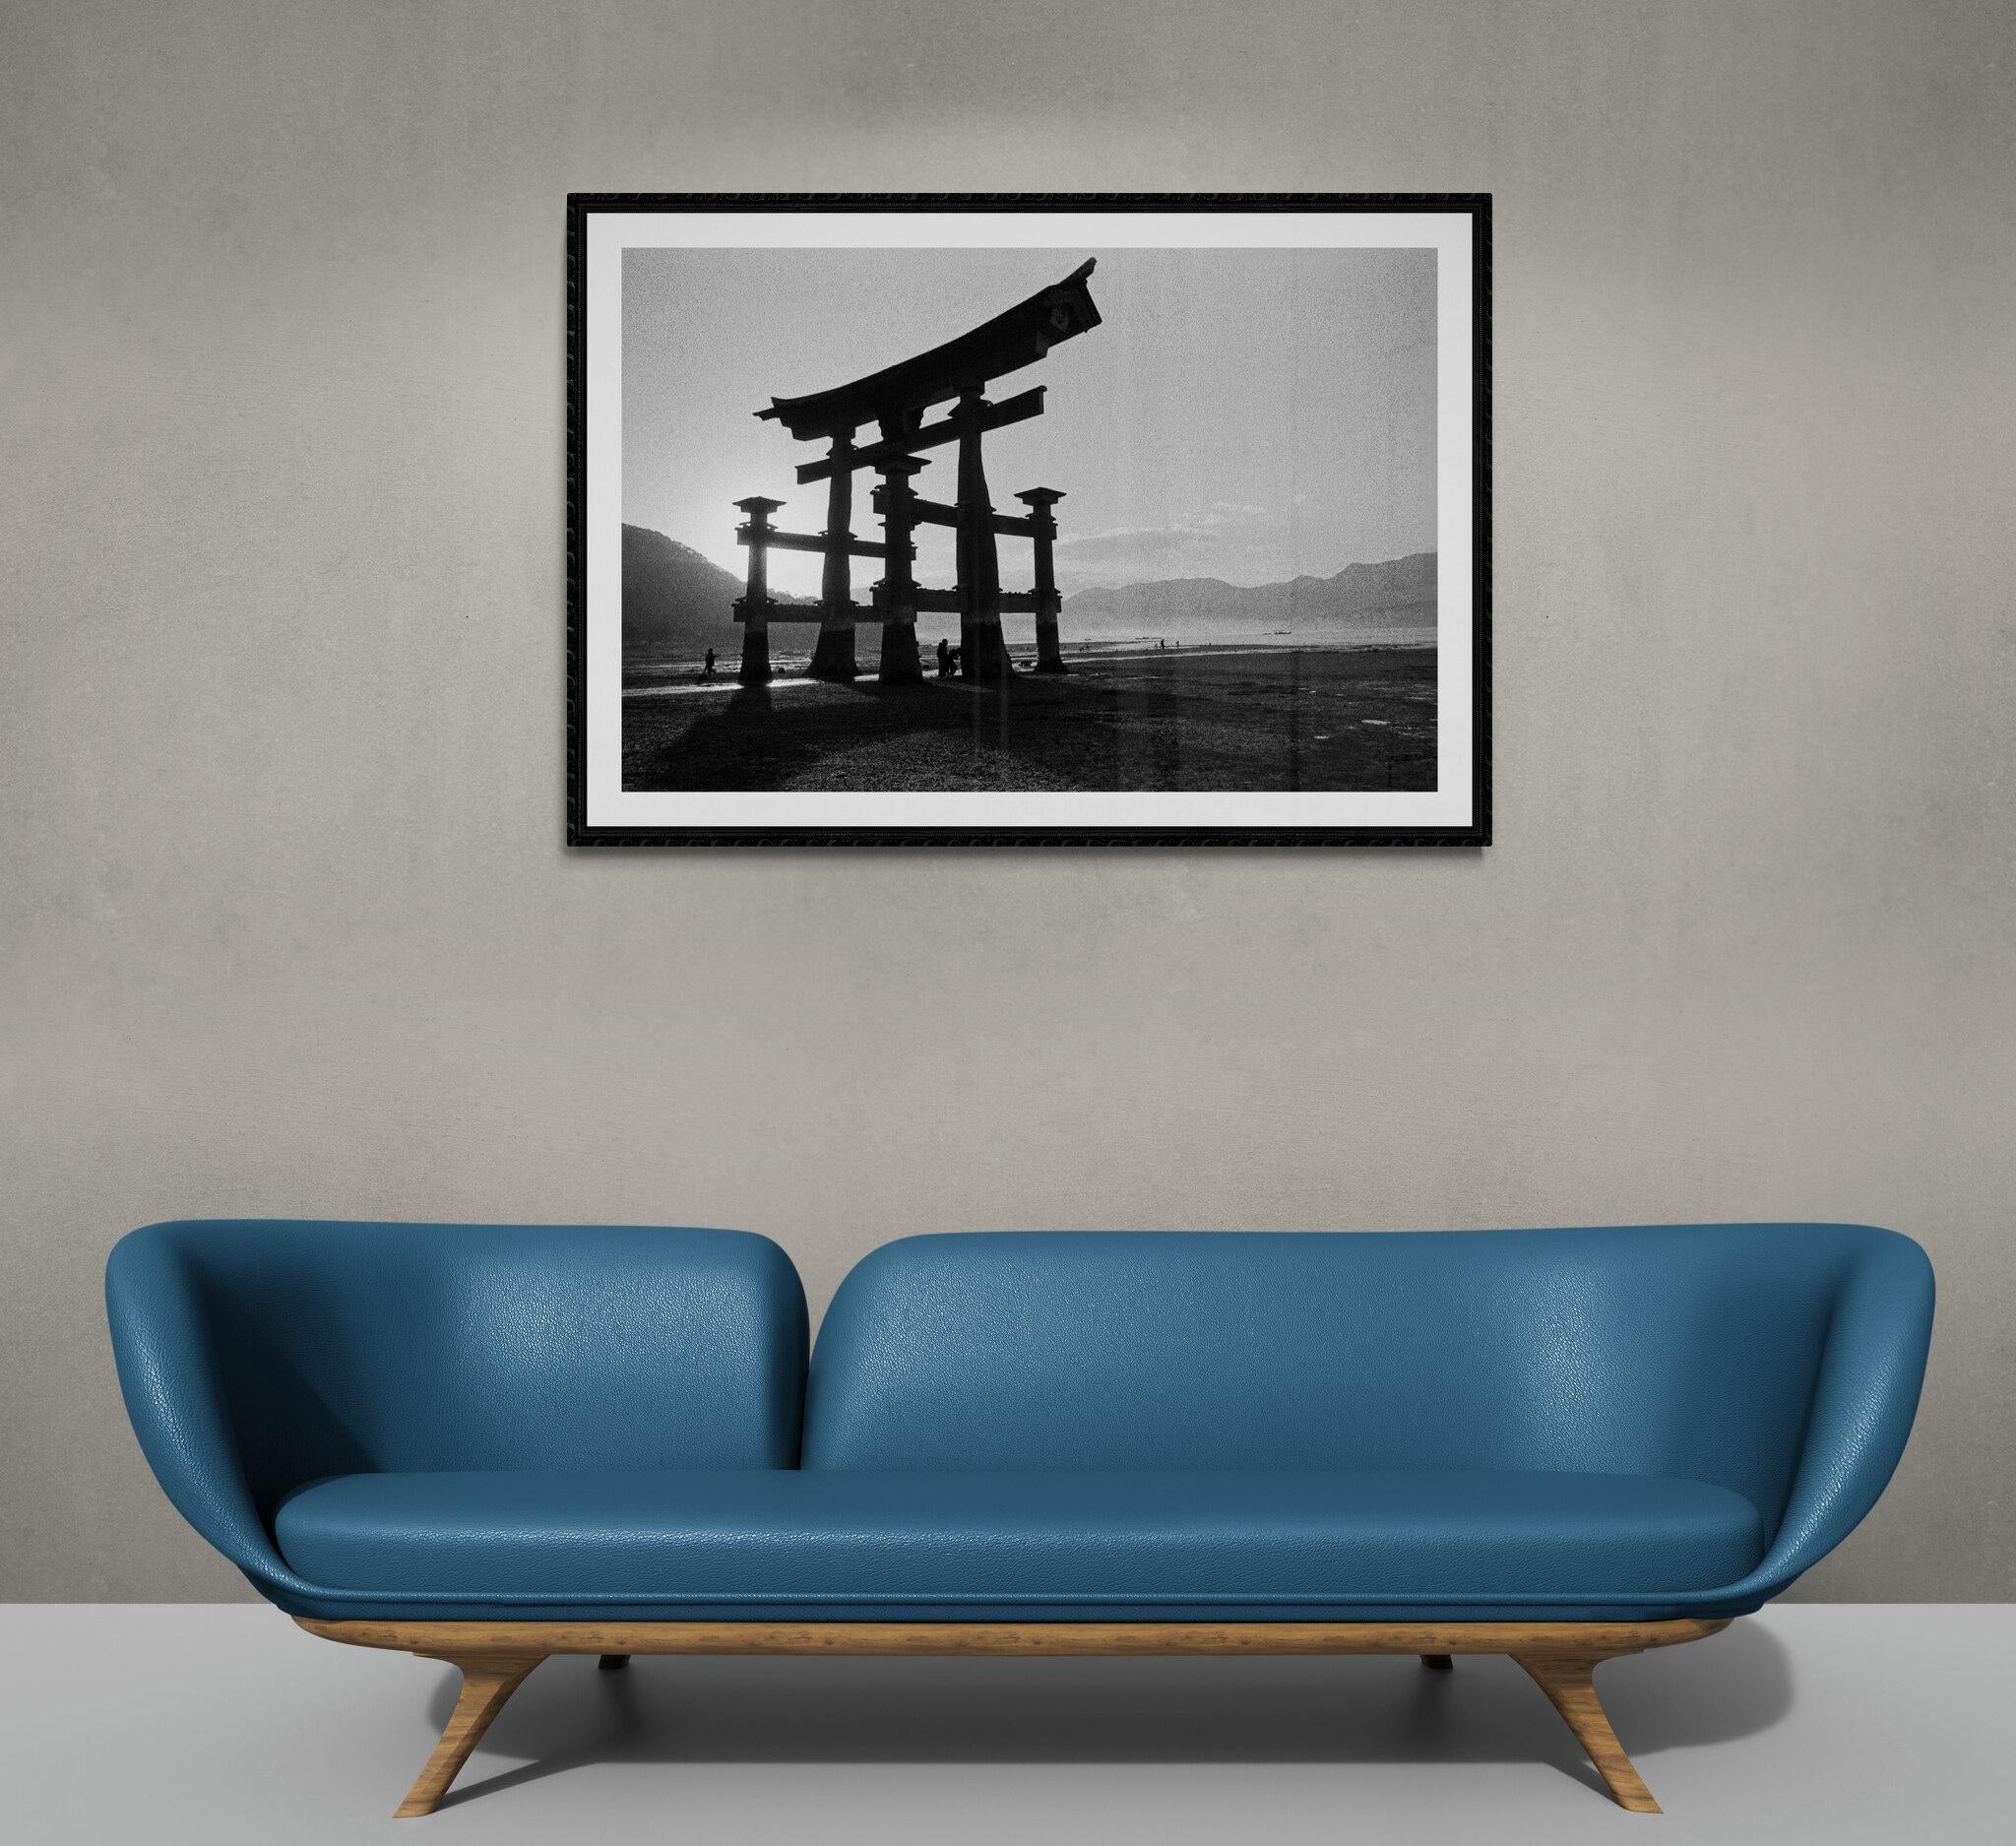 Artwork # 1 on 5 sold in limited edition in perfect condition 
Purezza, Miyajima - Japan 1960
This photo was made in 1960, the negative was digitized during the artist's lifetime and the technical parameters (framing, contrast, light, etc.) was